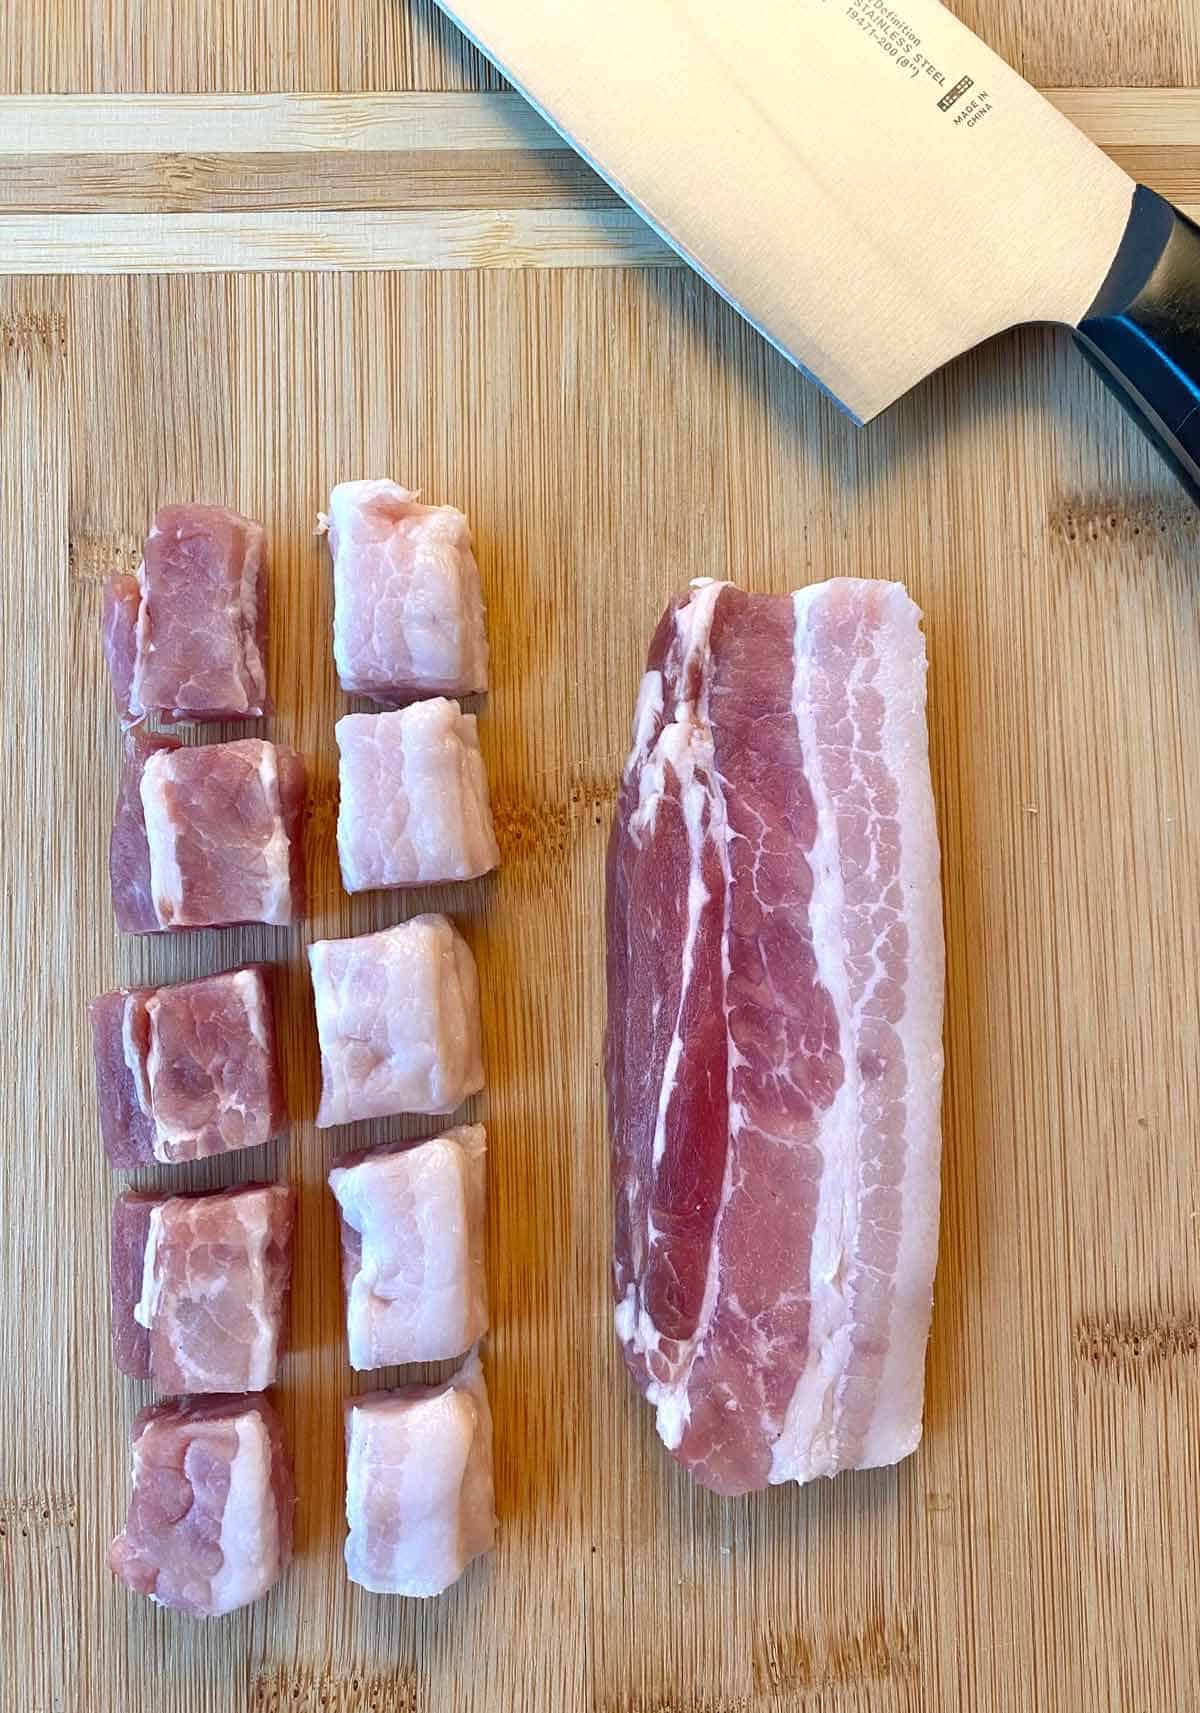 Two halved bacon strip stacks and a knife, showing how to properly cut bacon slices in squares.